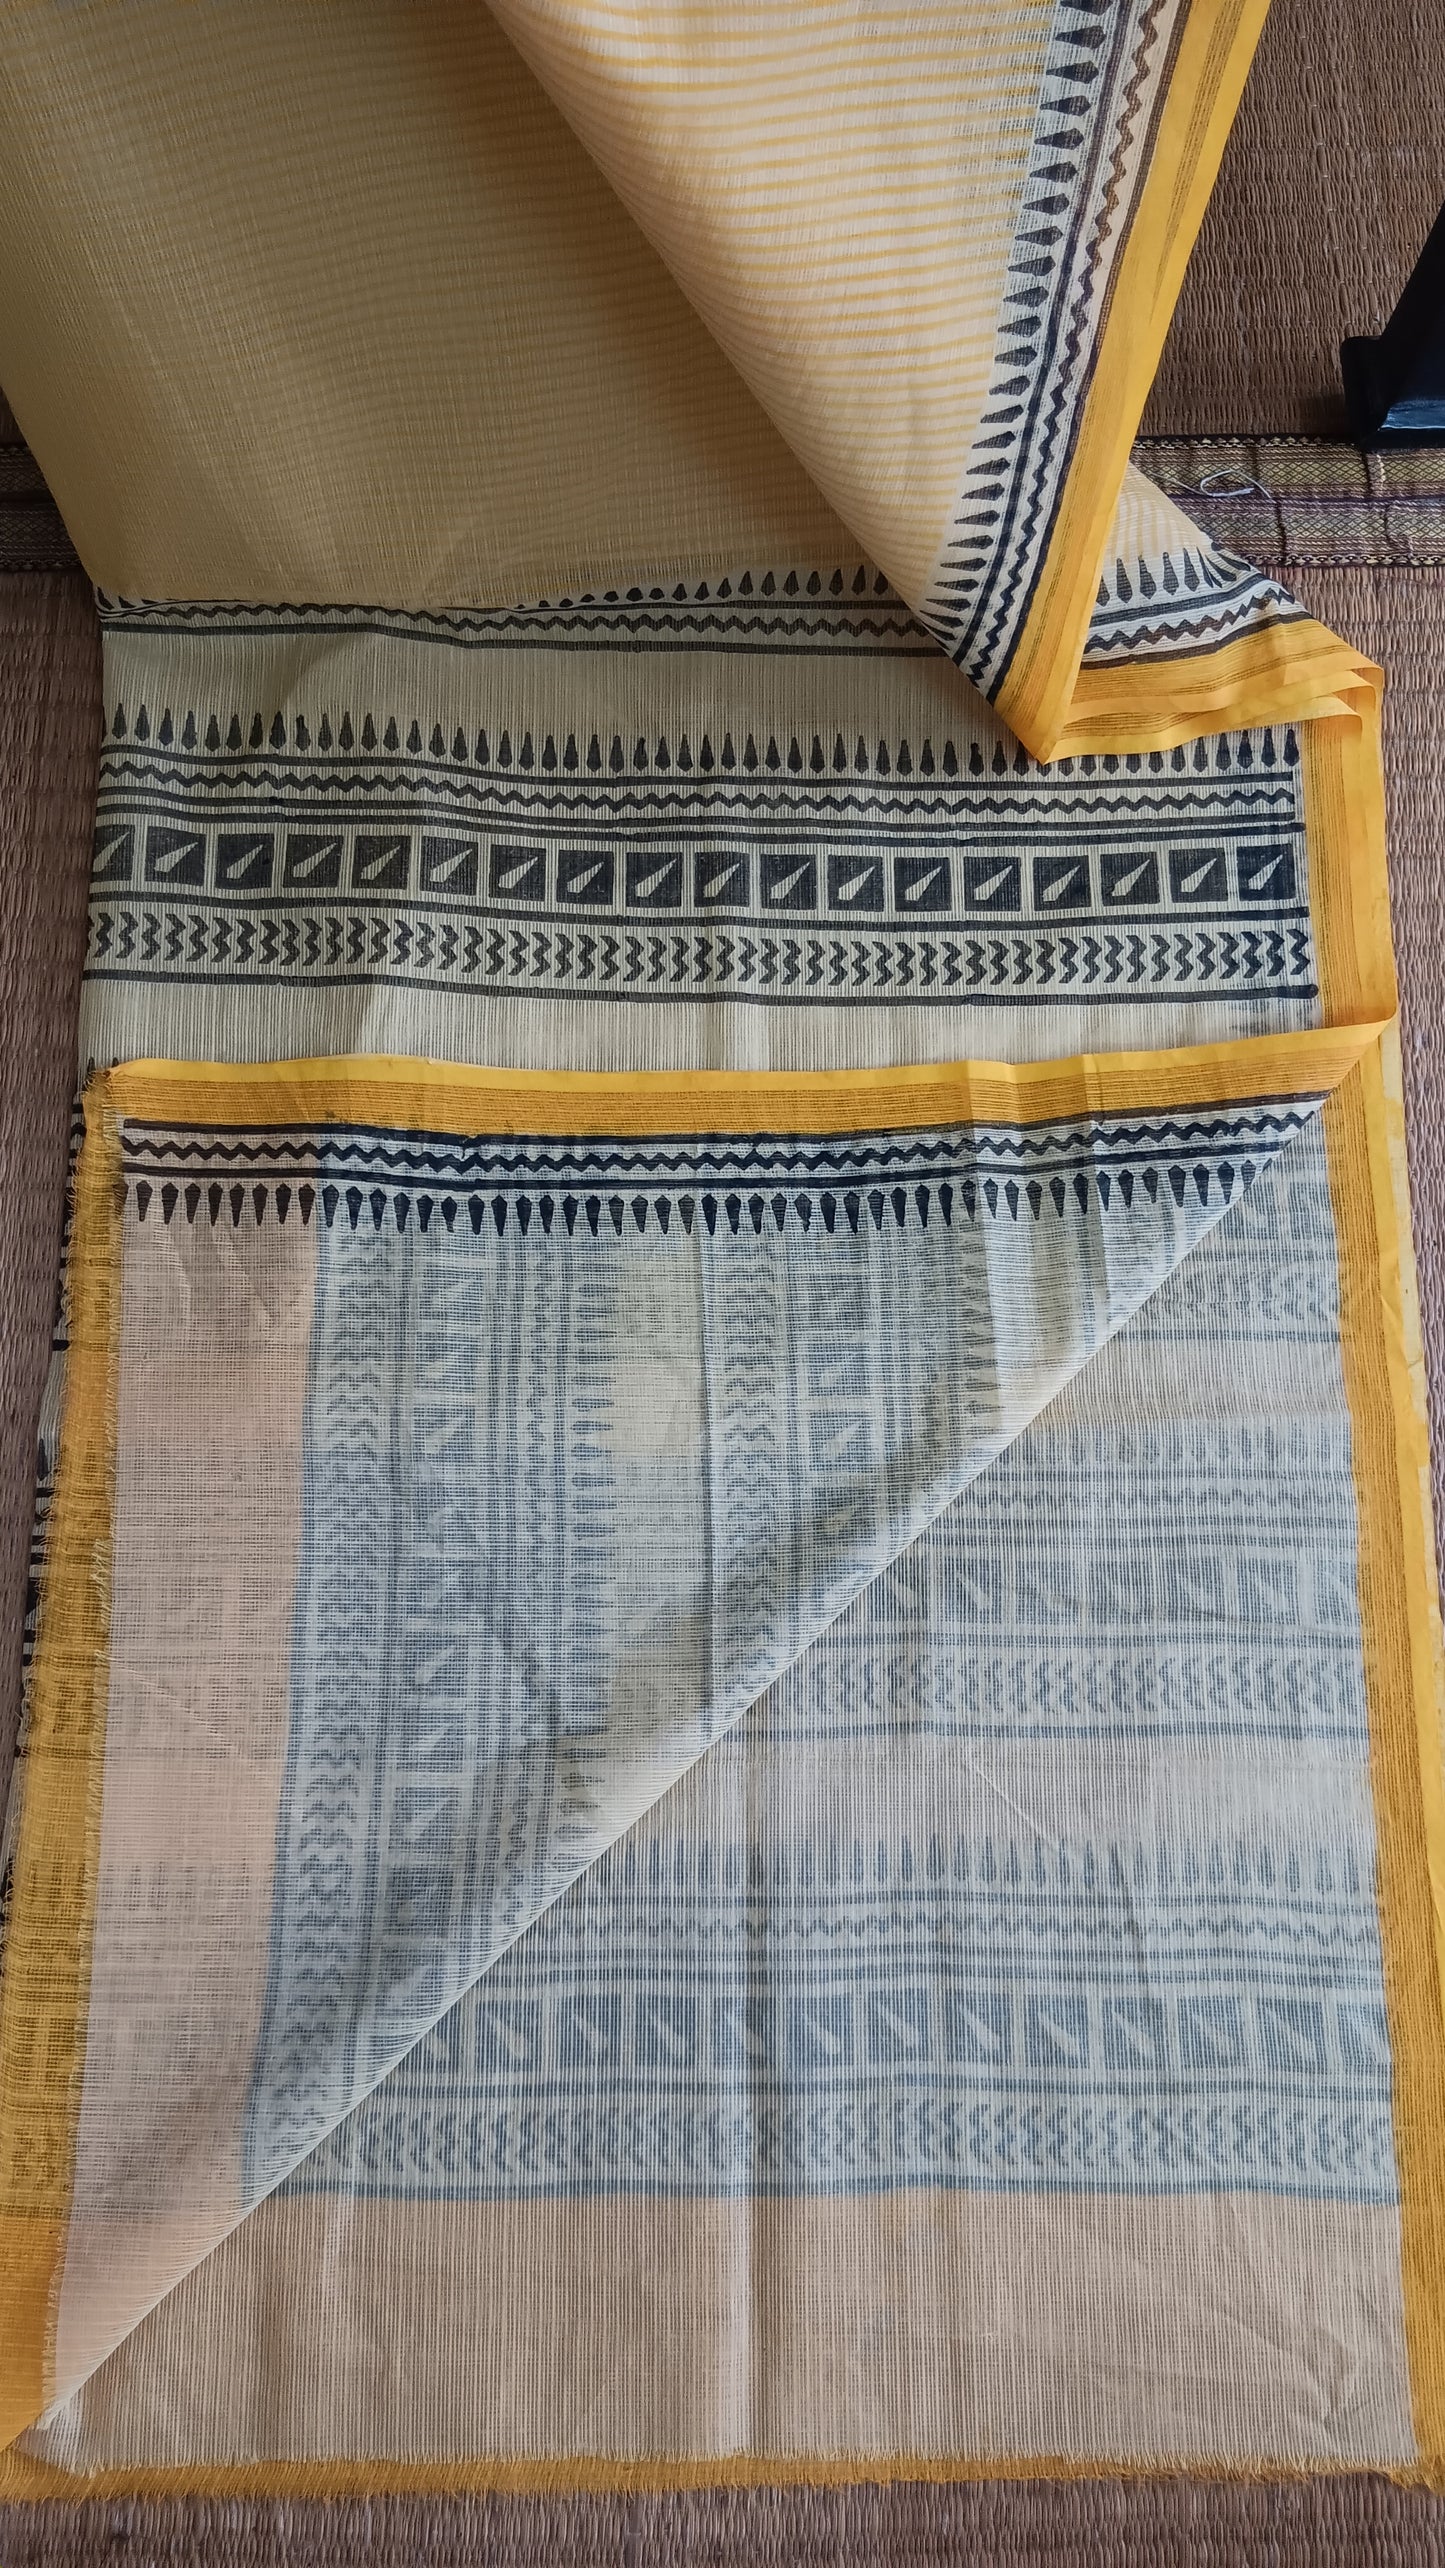 View from the top the plain blouse of a yellow daily wear kota cotton saree